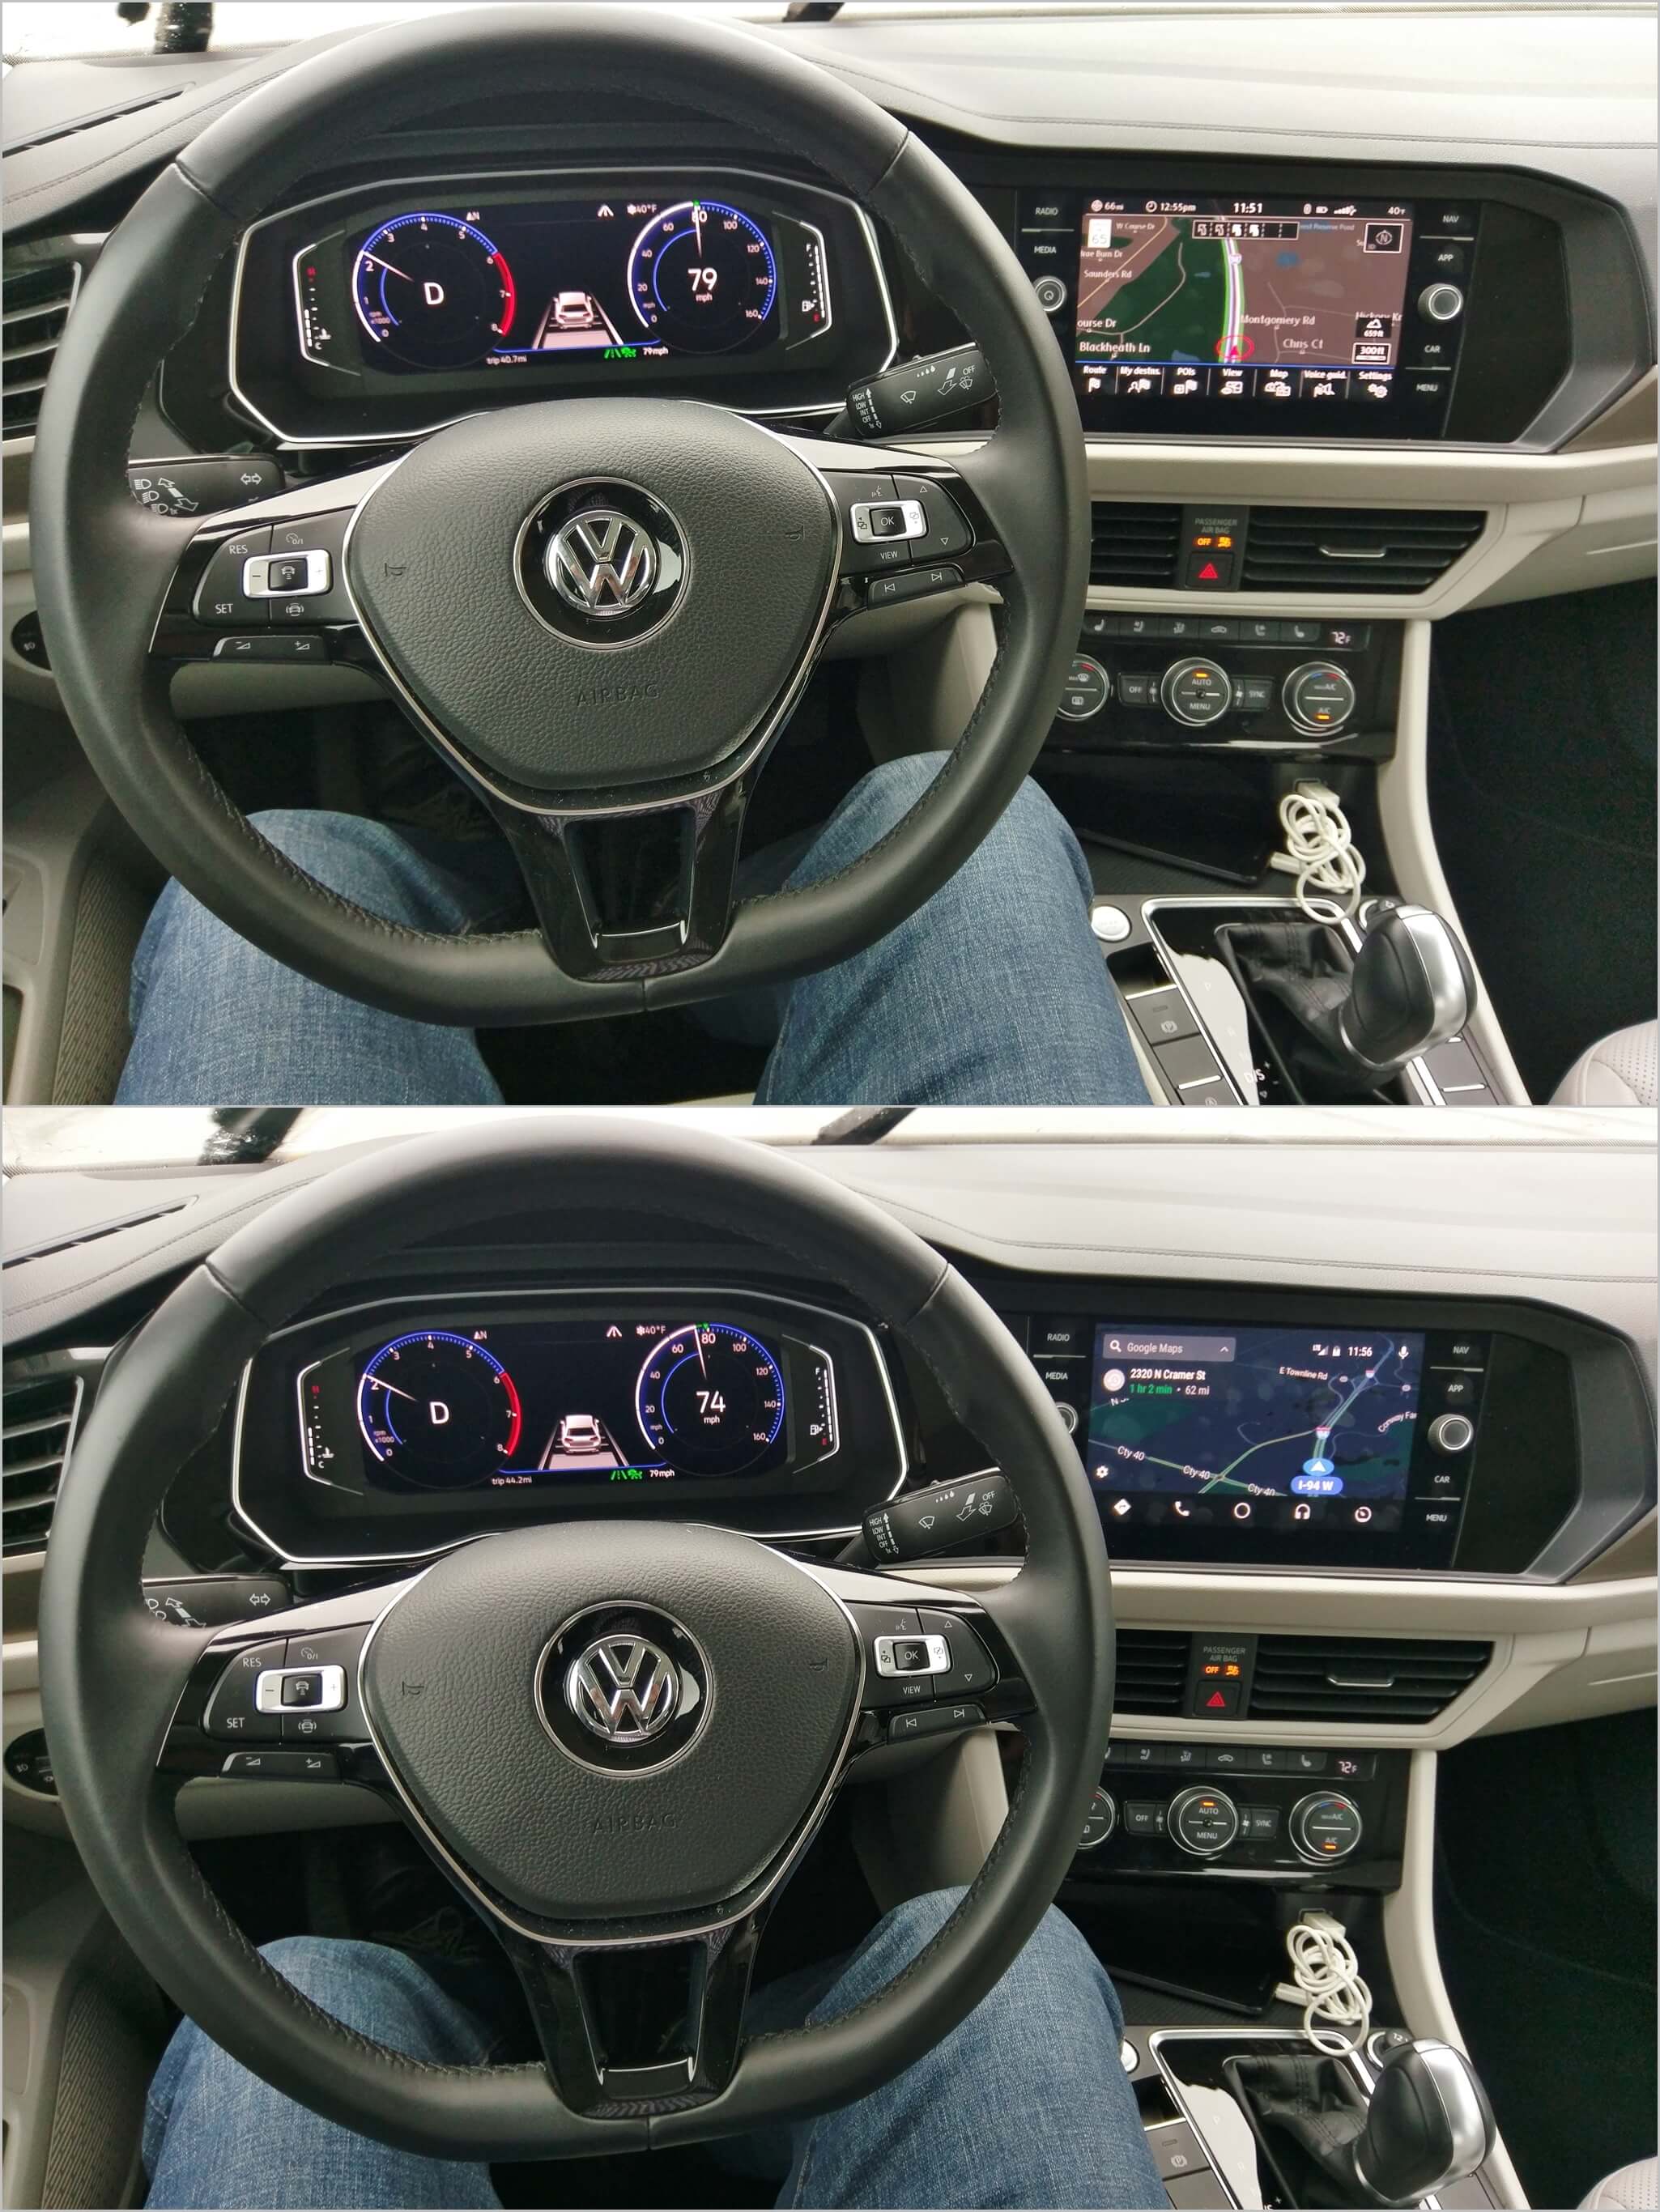 2019 Volkswagen Jetta SEL Premium: native GPS HDD navigation vs. Android Auto, each with voice guidance, the latter with more versatile voice commands